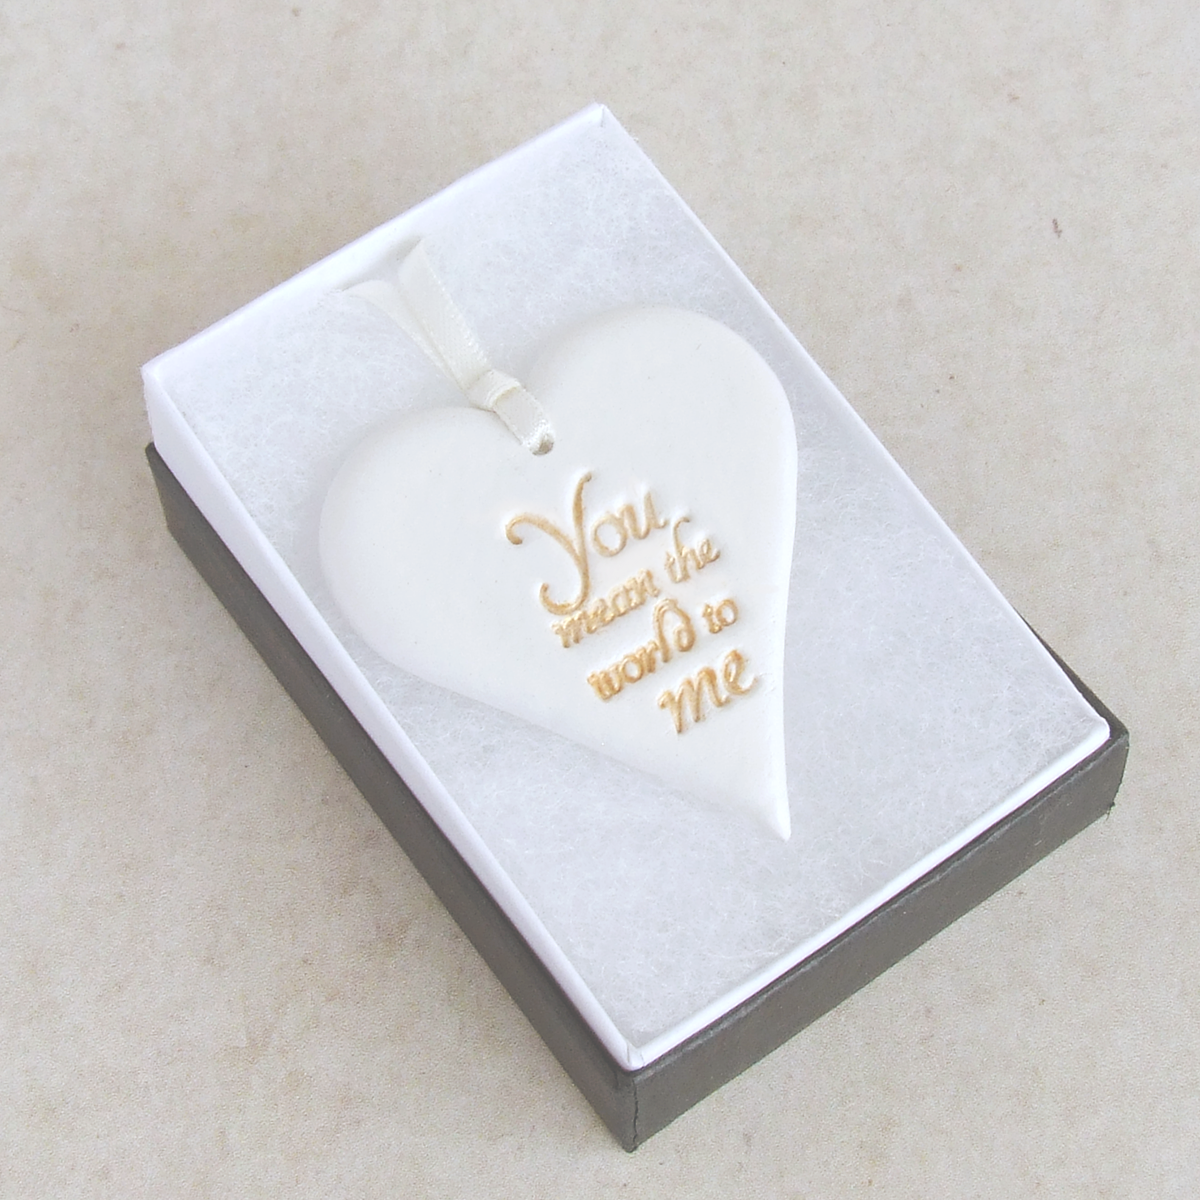 Heart shaped hanging ornament made from white clay with gold worlds 'You mean the world to me' , laying in a gift box.